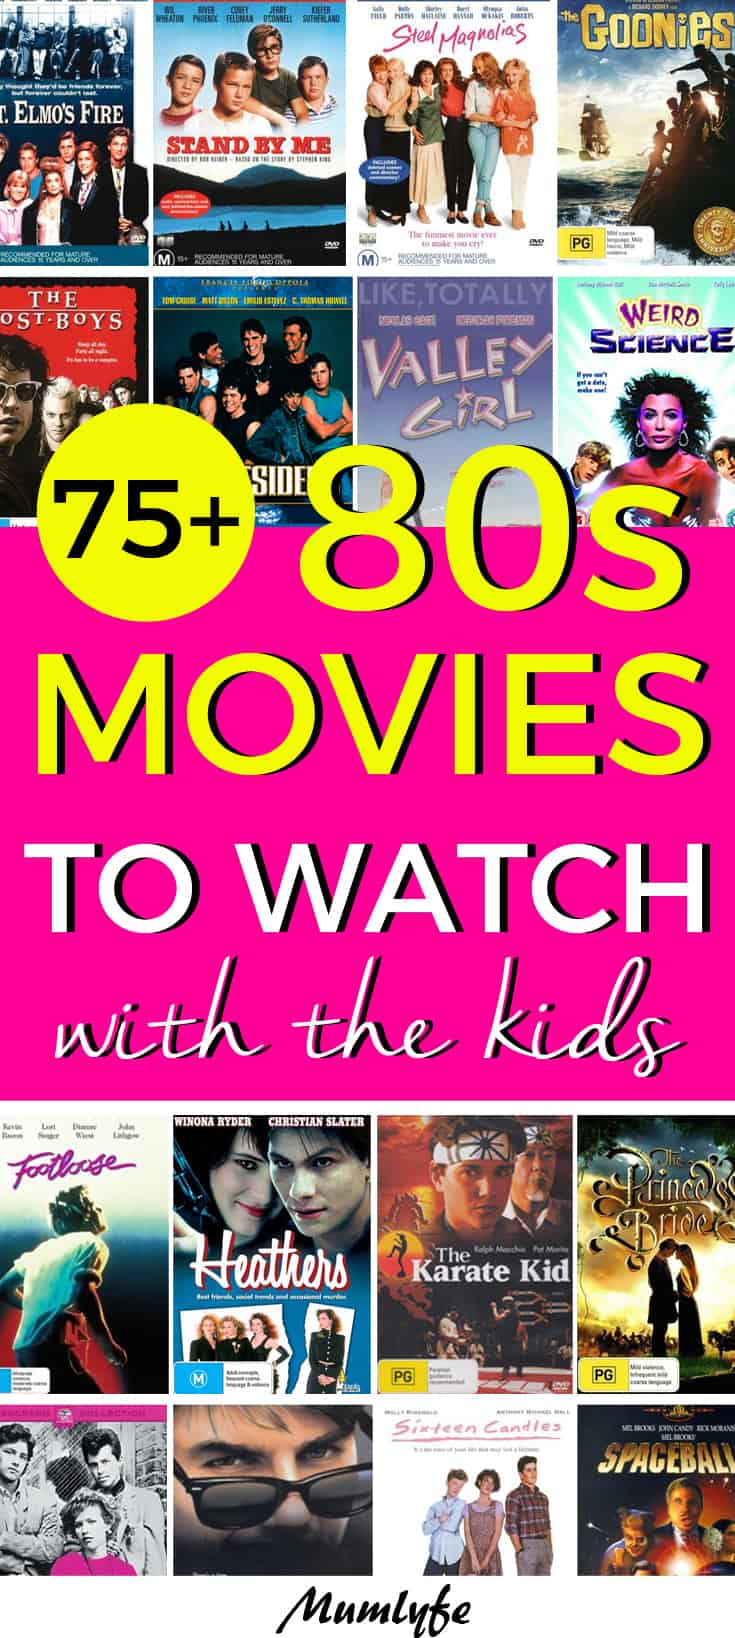 The best 80s movies to watch with the kids - awesome way to spend time together #80smovies #teens #movies